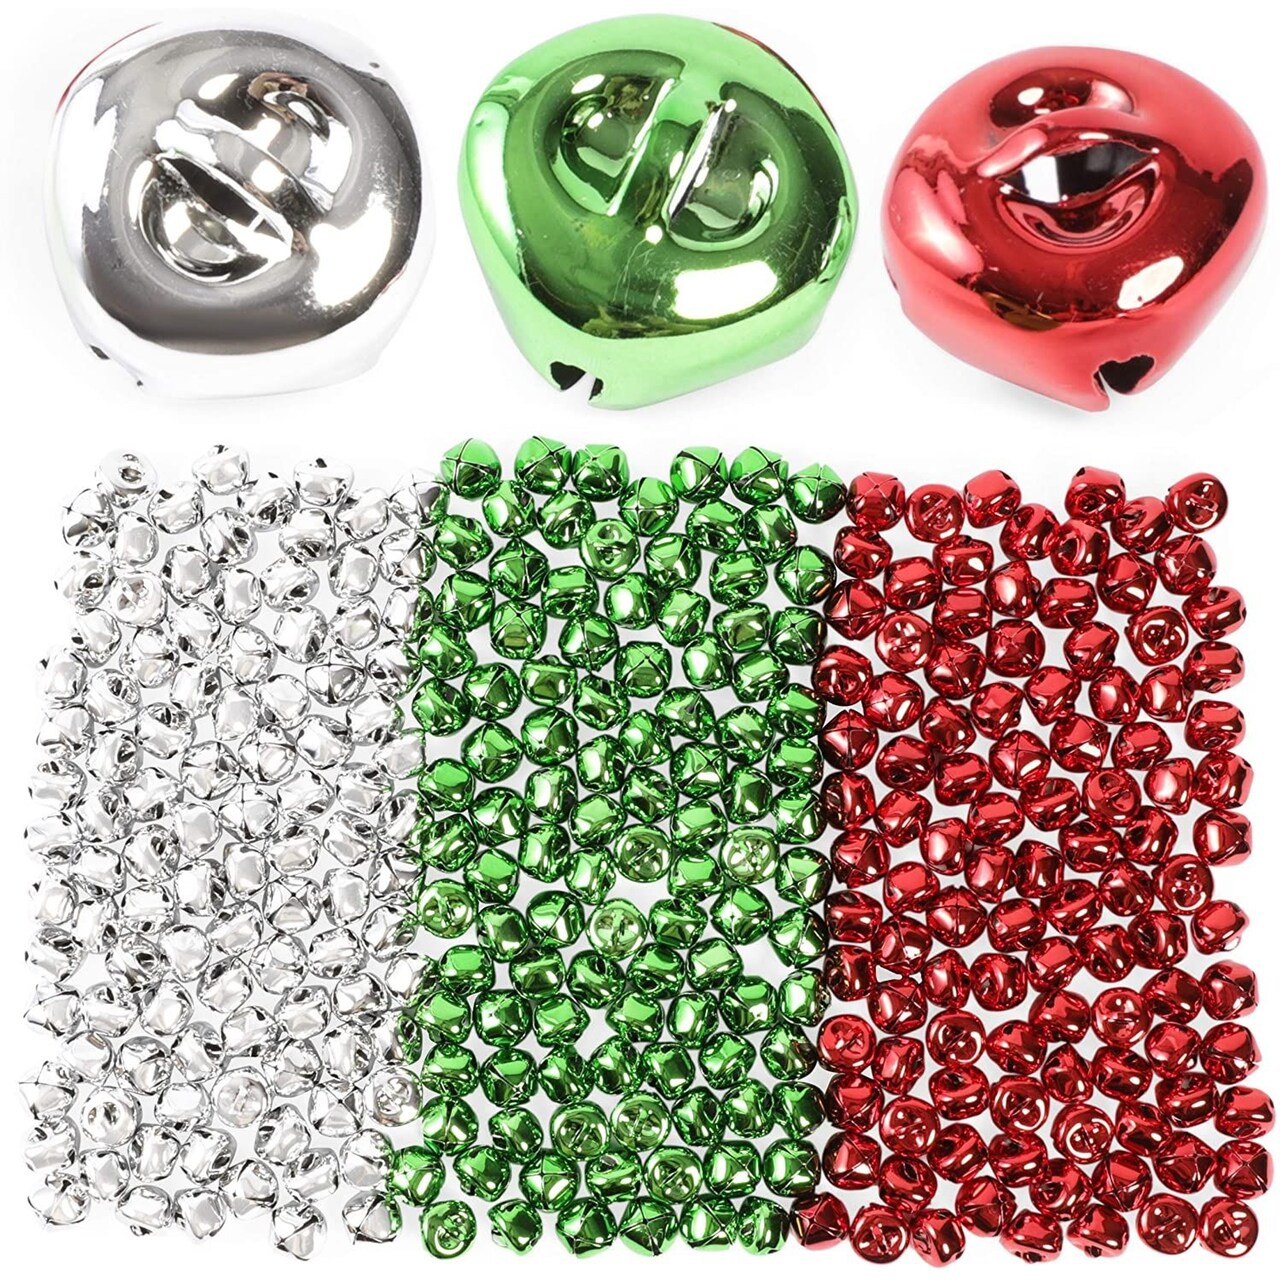 300 Pieces Mini Colorful Jingle Bells for Christmas Decorations